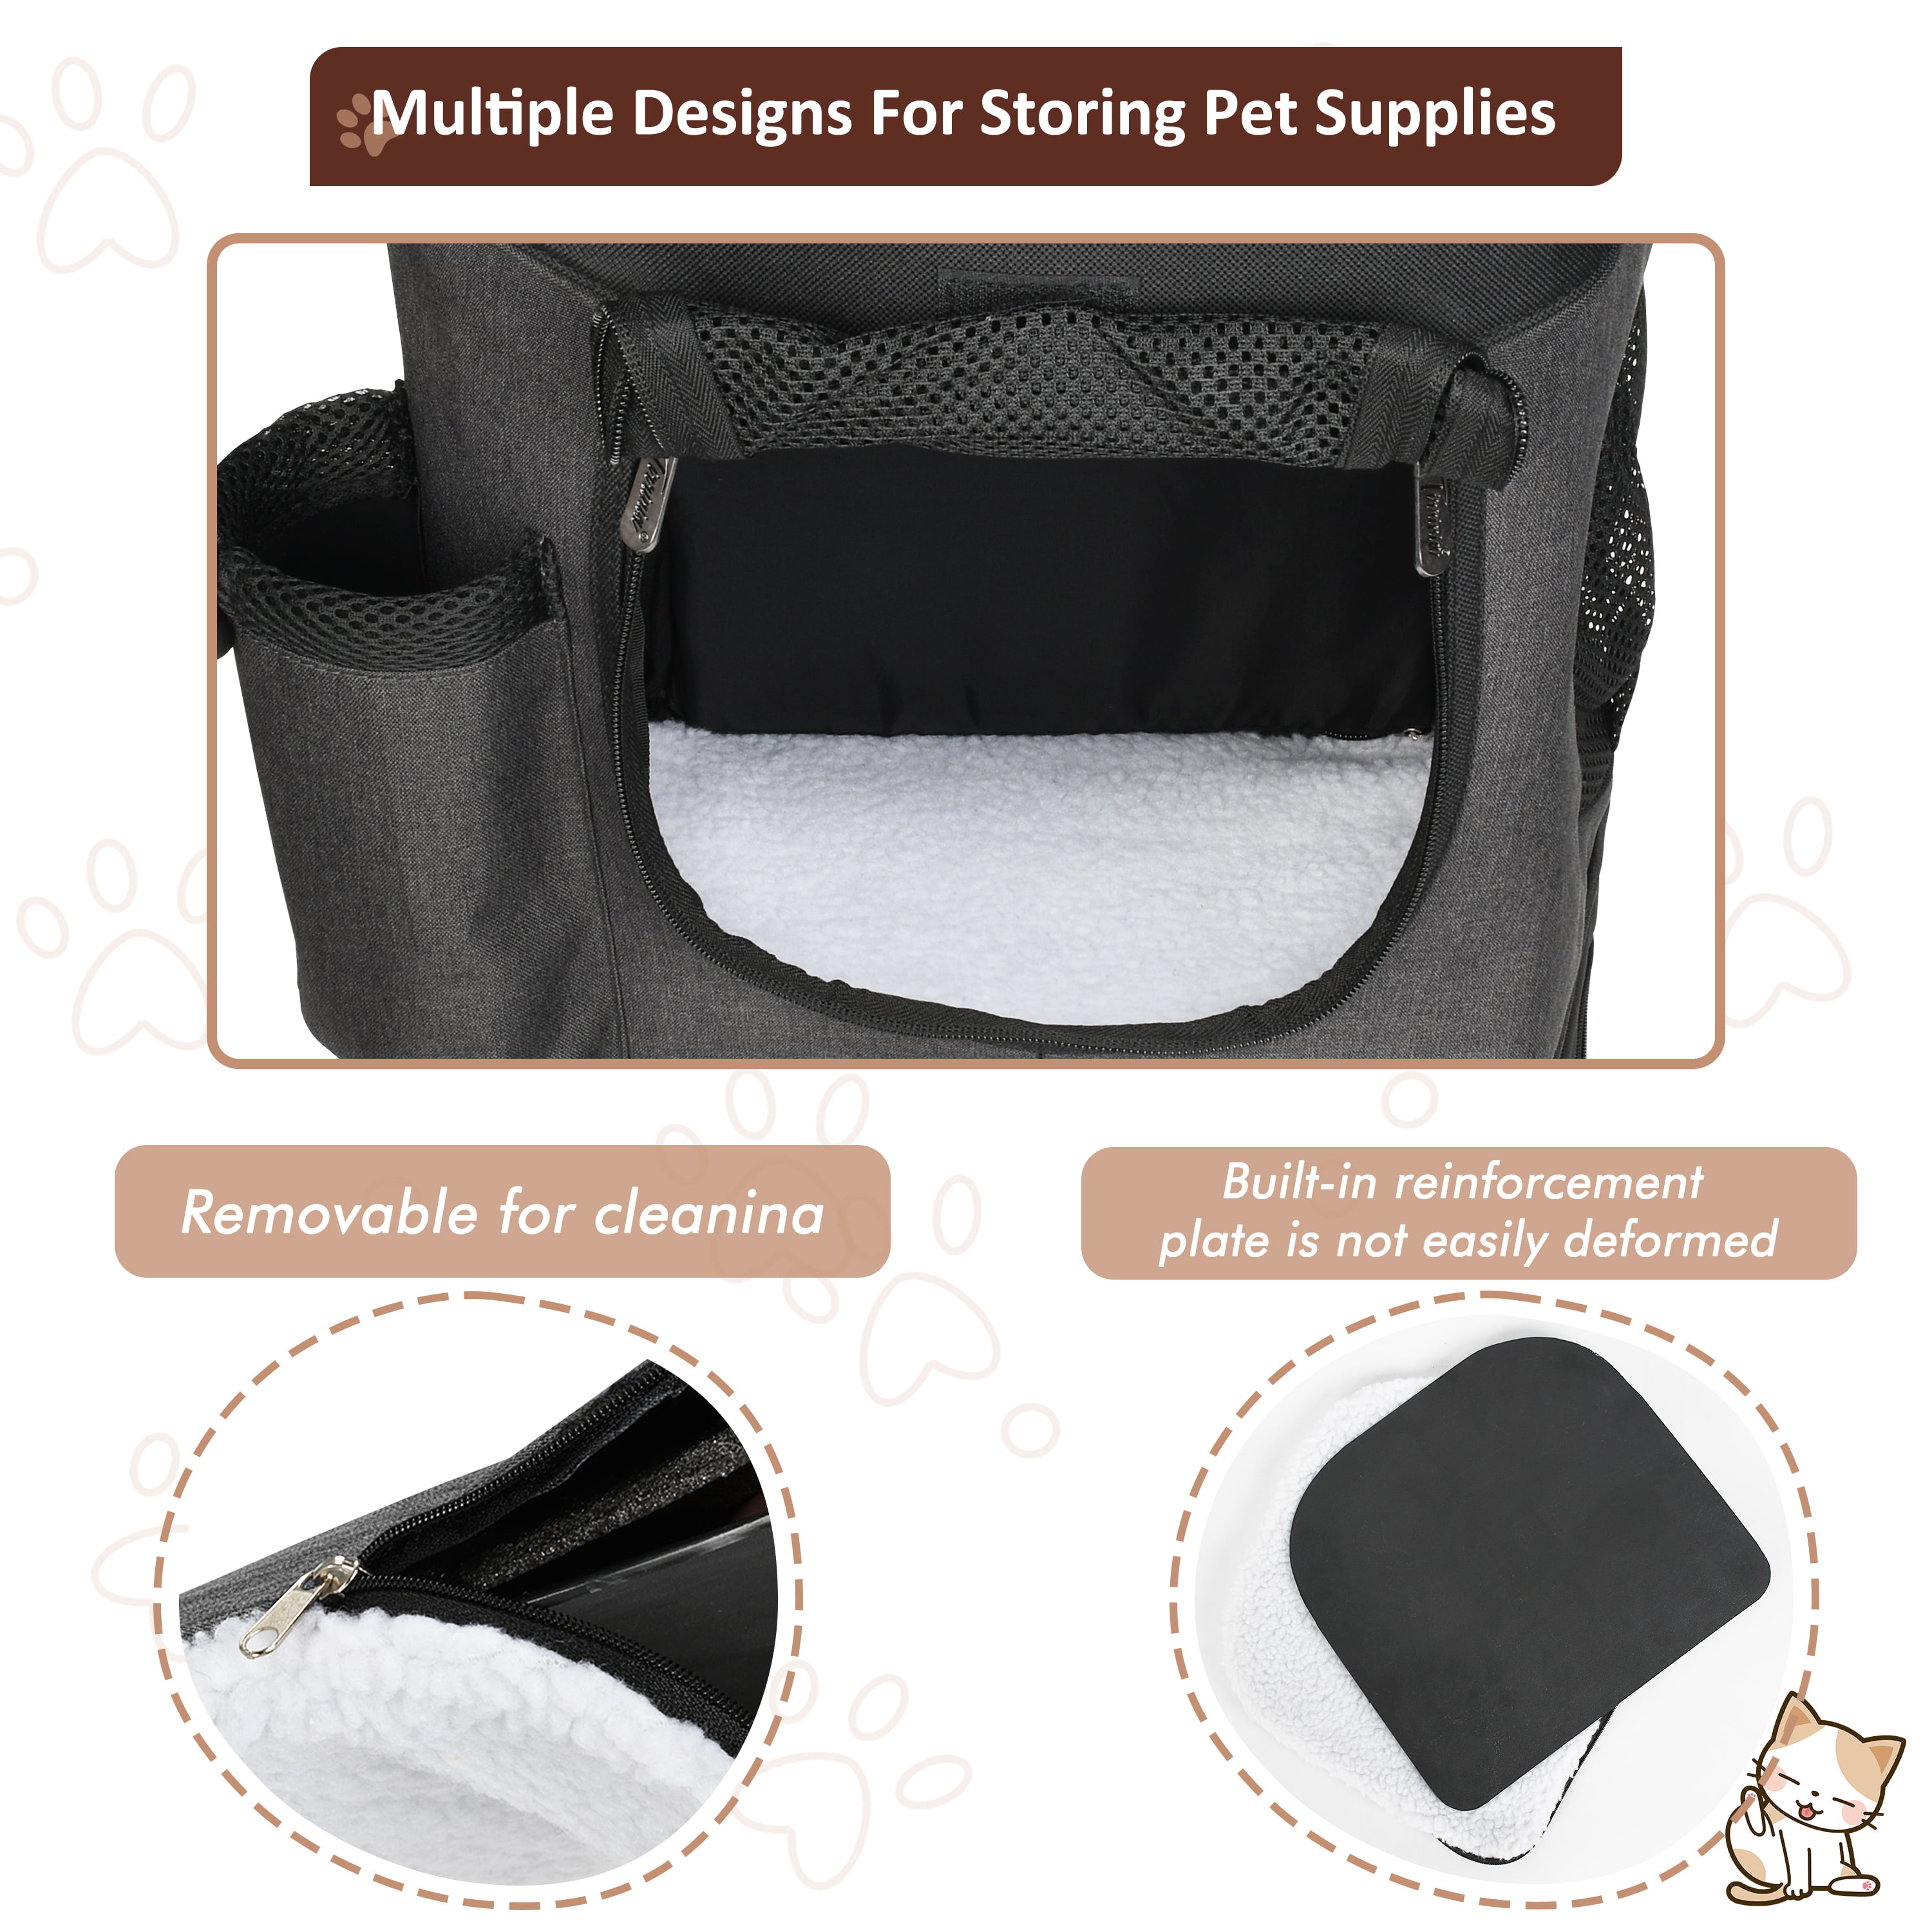 Adrienes Choice Luxury Pet Carrier, Puppy Small Dog Carrier, Cat Carrier Bag, Waterproof Premium PU Leather Carrying Handbag For Outdoor Travel